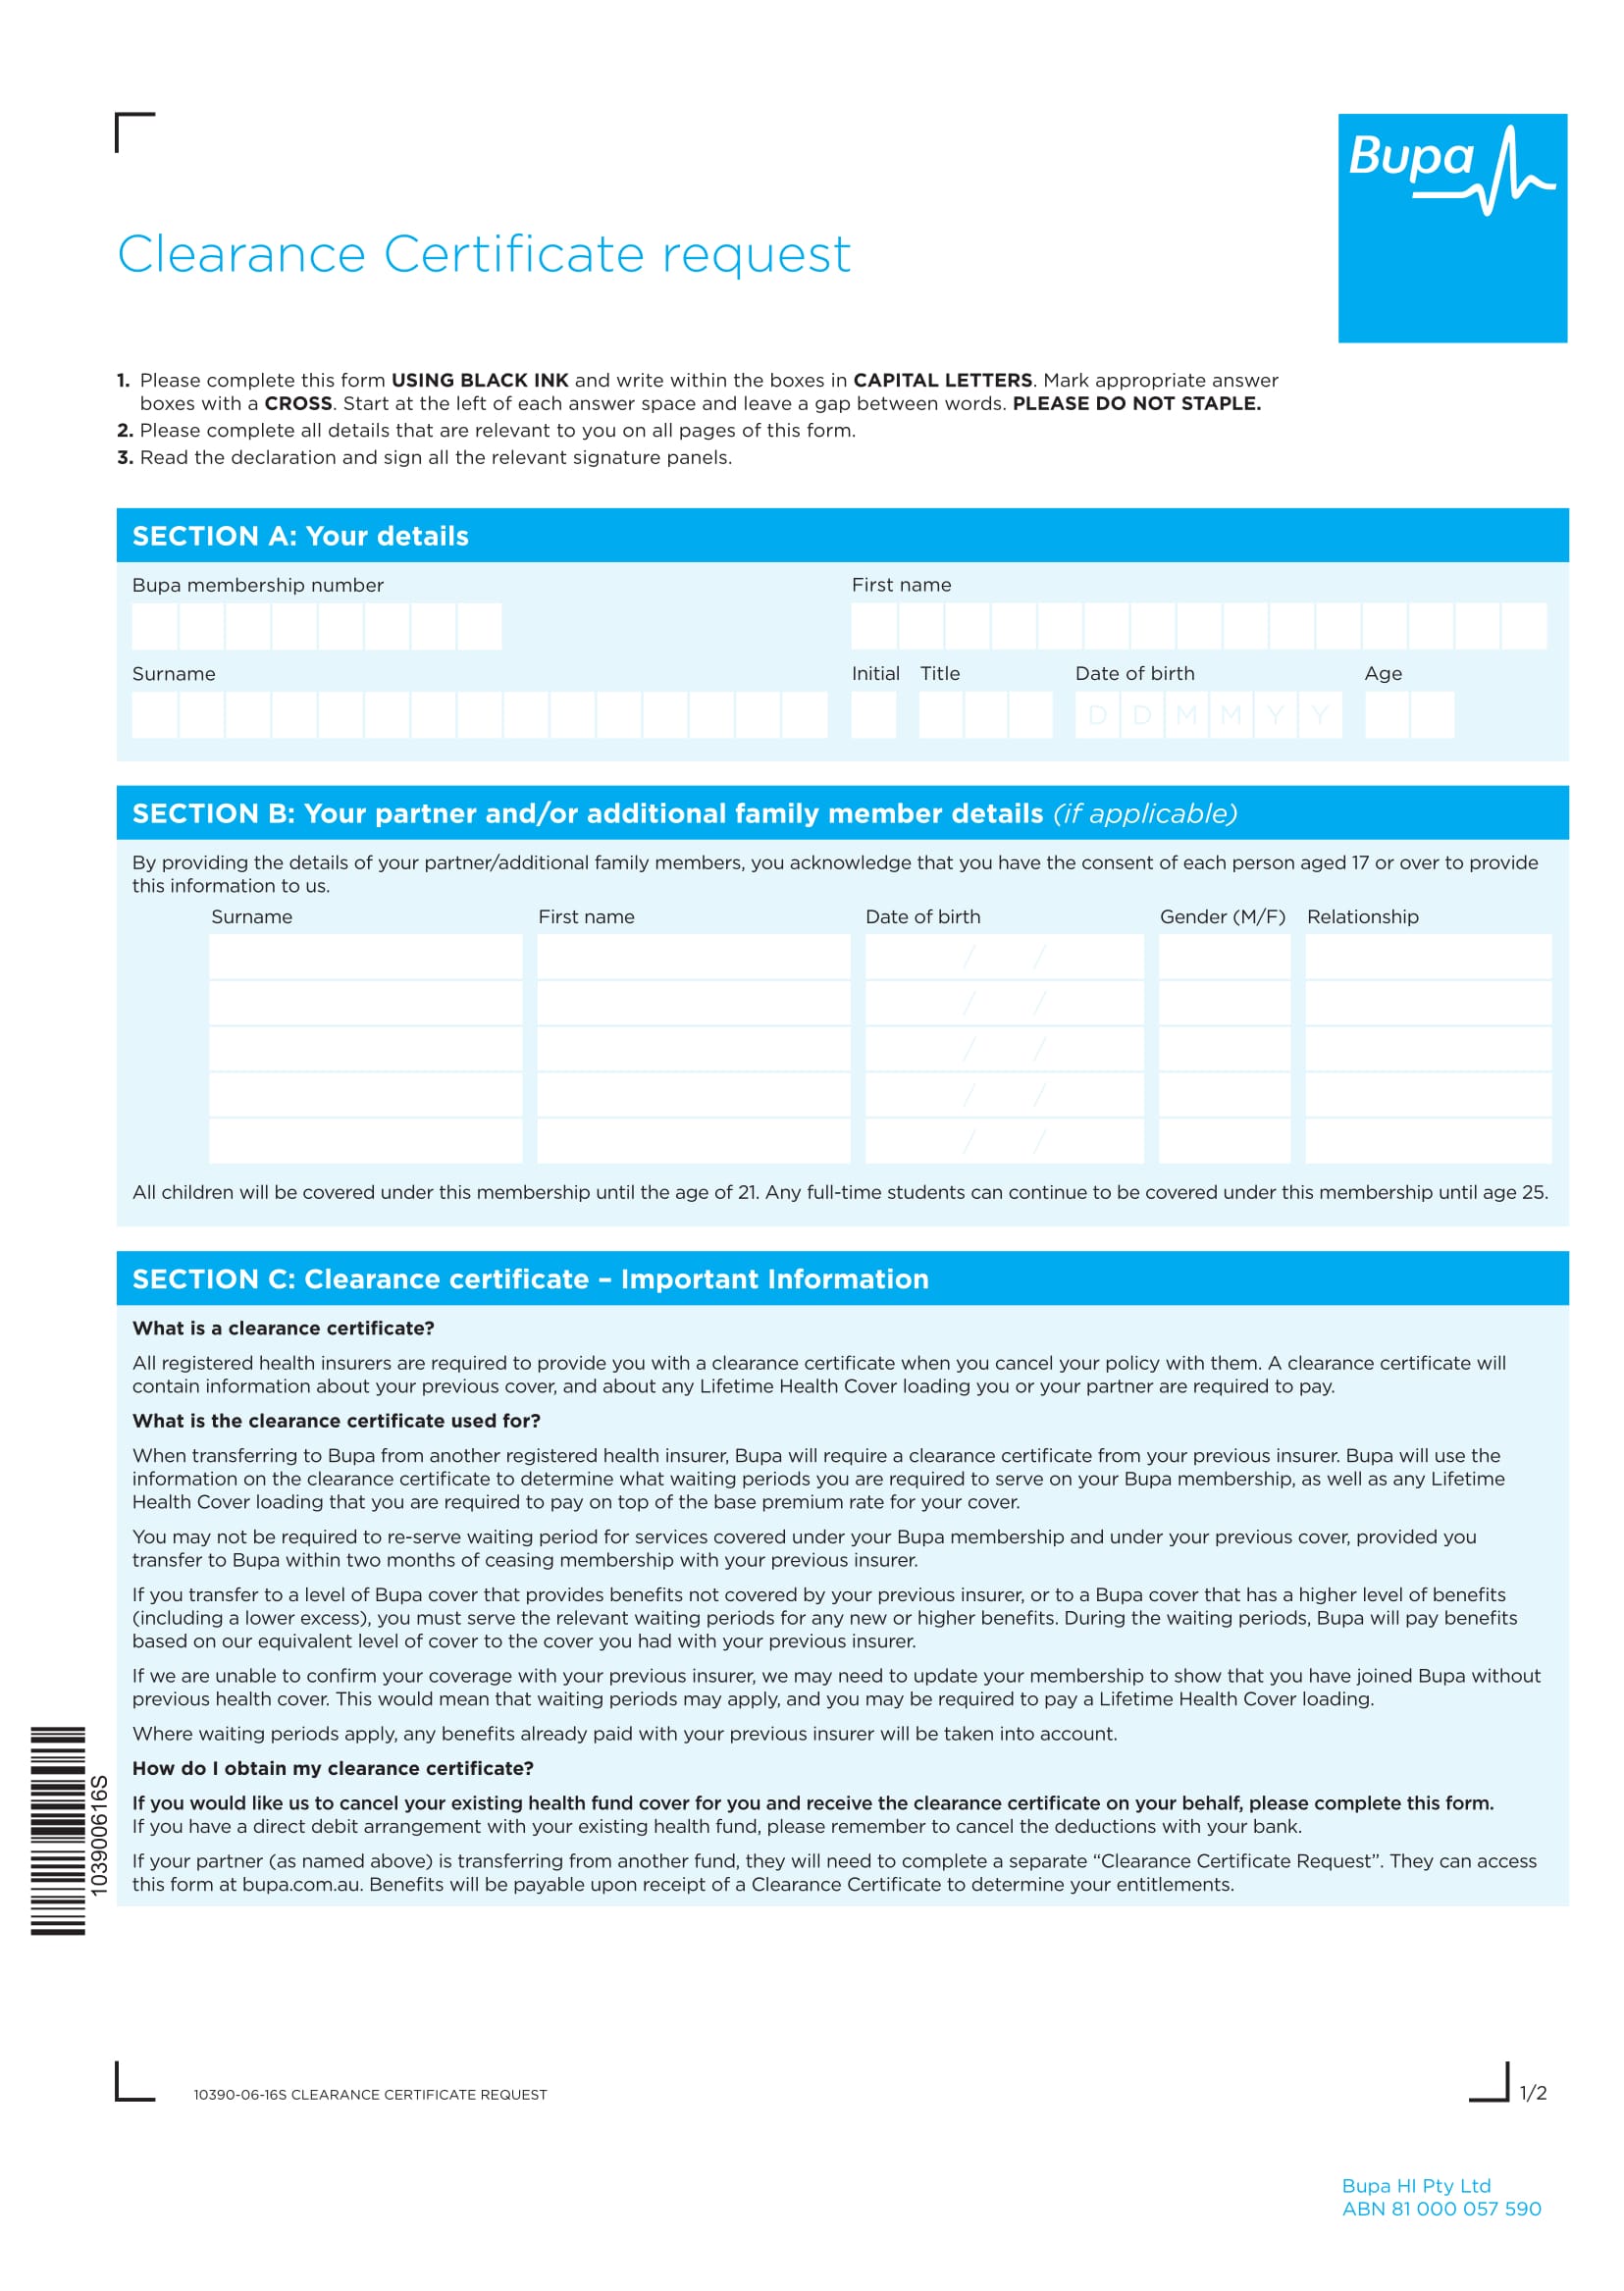 clearance certificate request form 1